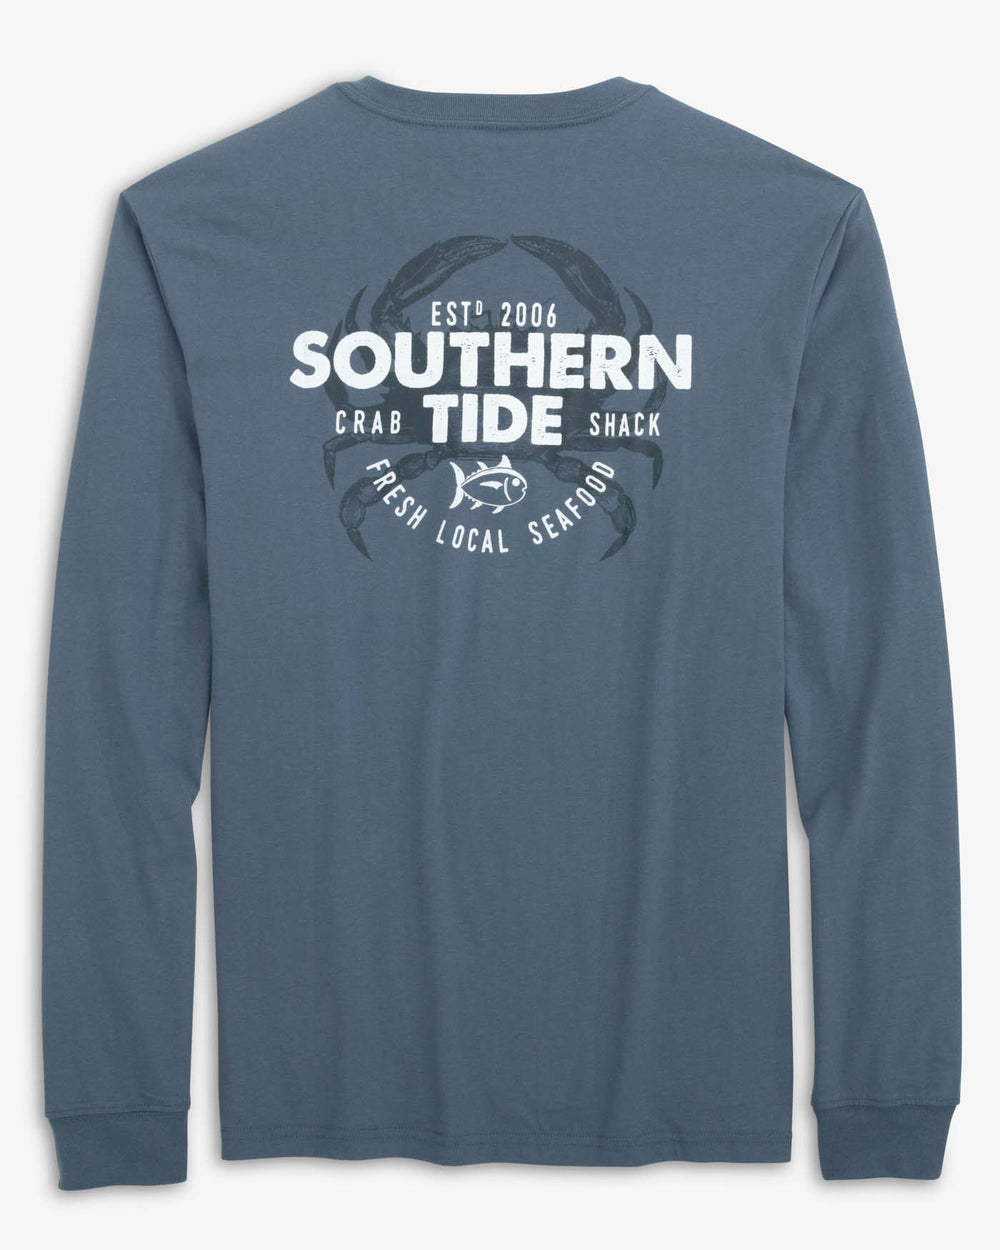 The back view of the Southern Tide Fresh Local Seafood Long Sleeve T-Shirt by Southern Tide - Blue Haze